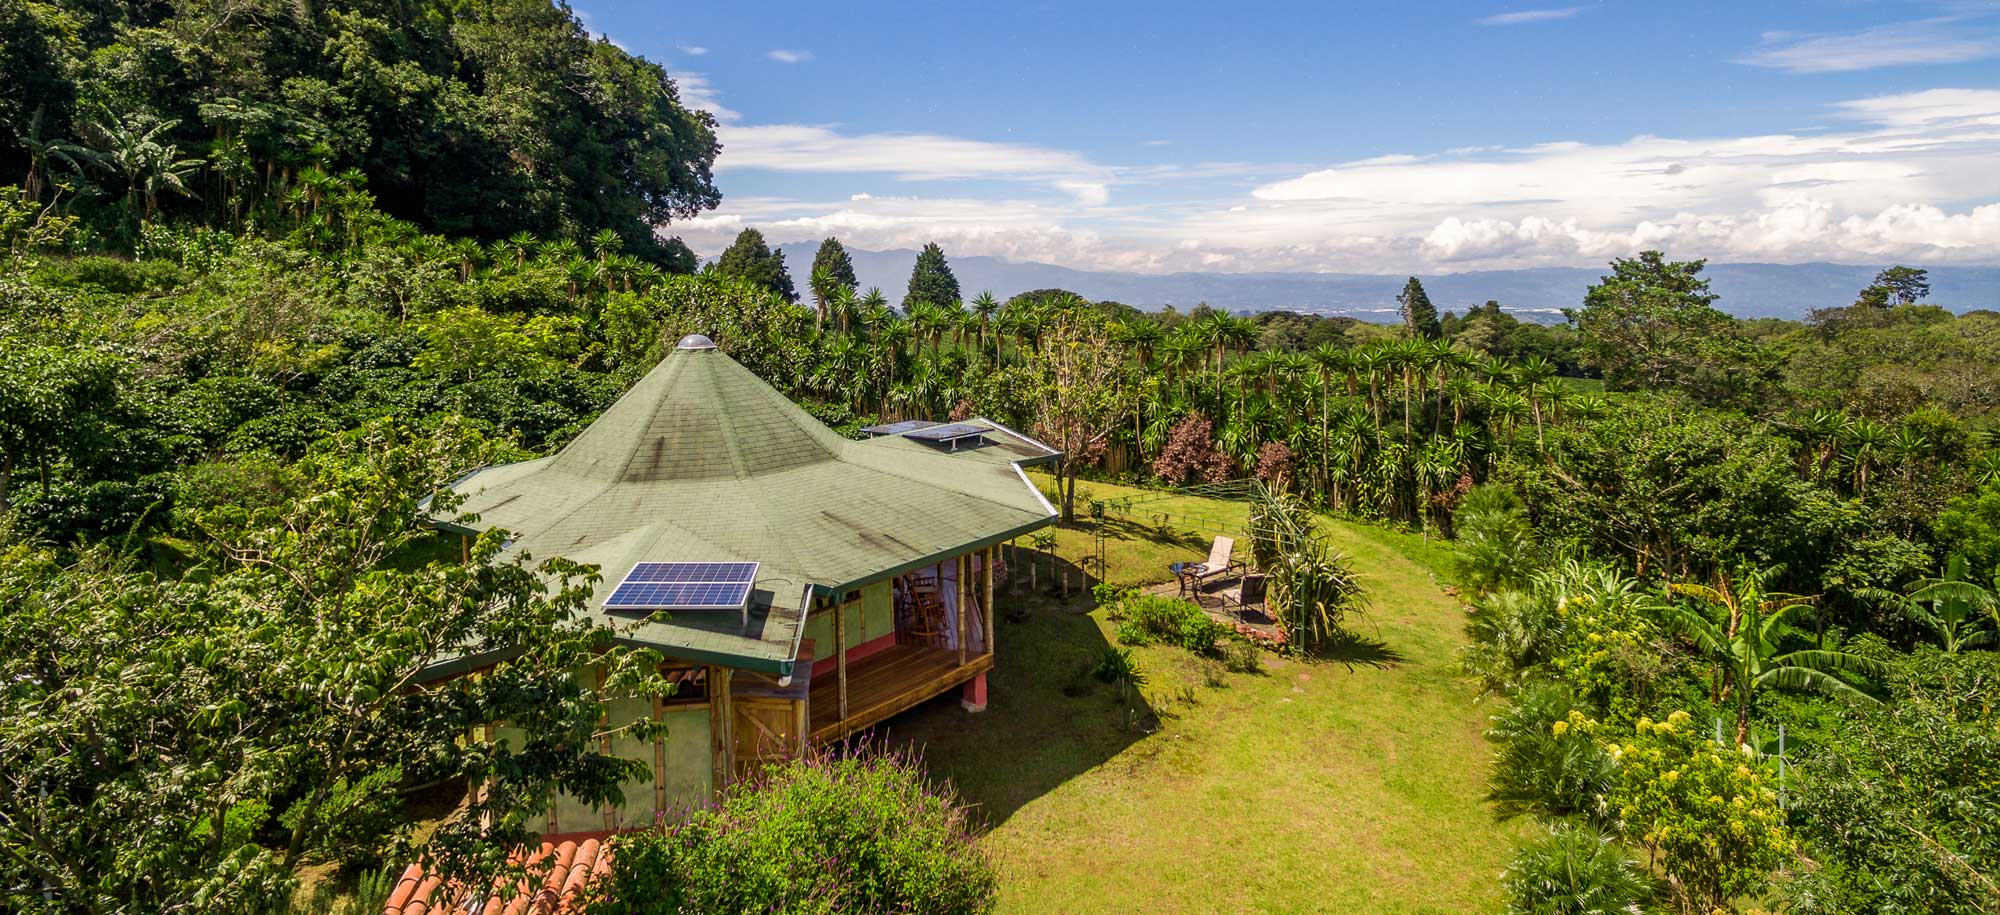 Beautiful Coffee Farm for sale with Bamboo House featuring an Architecturally Stunning Cathedral Ceiling - $399,000